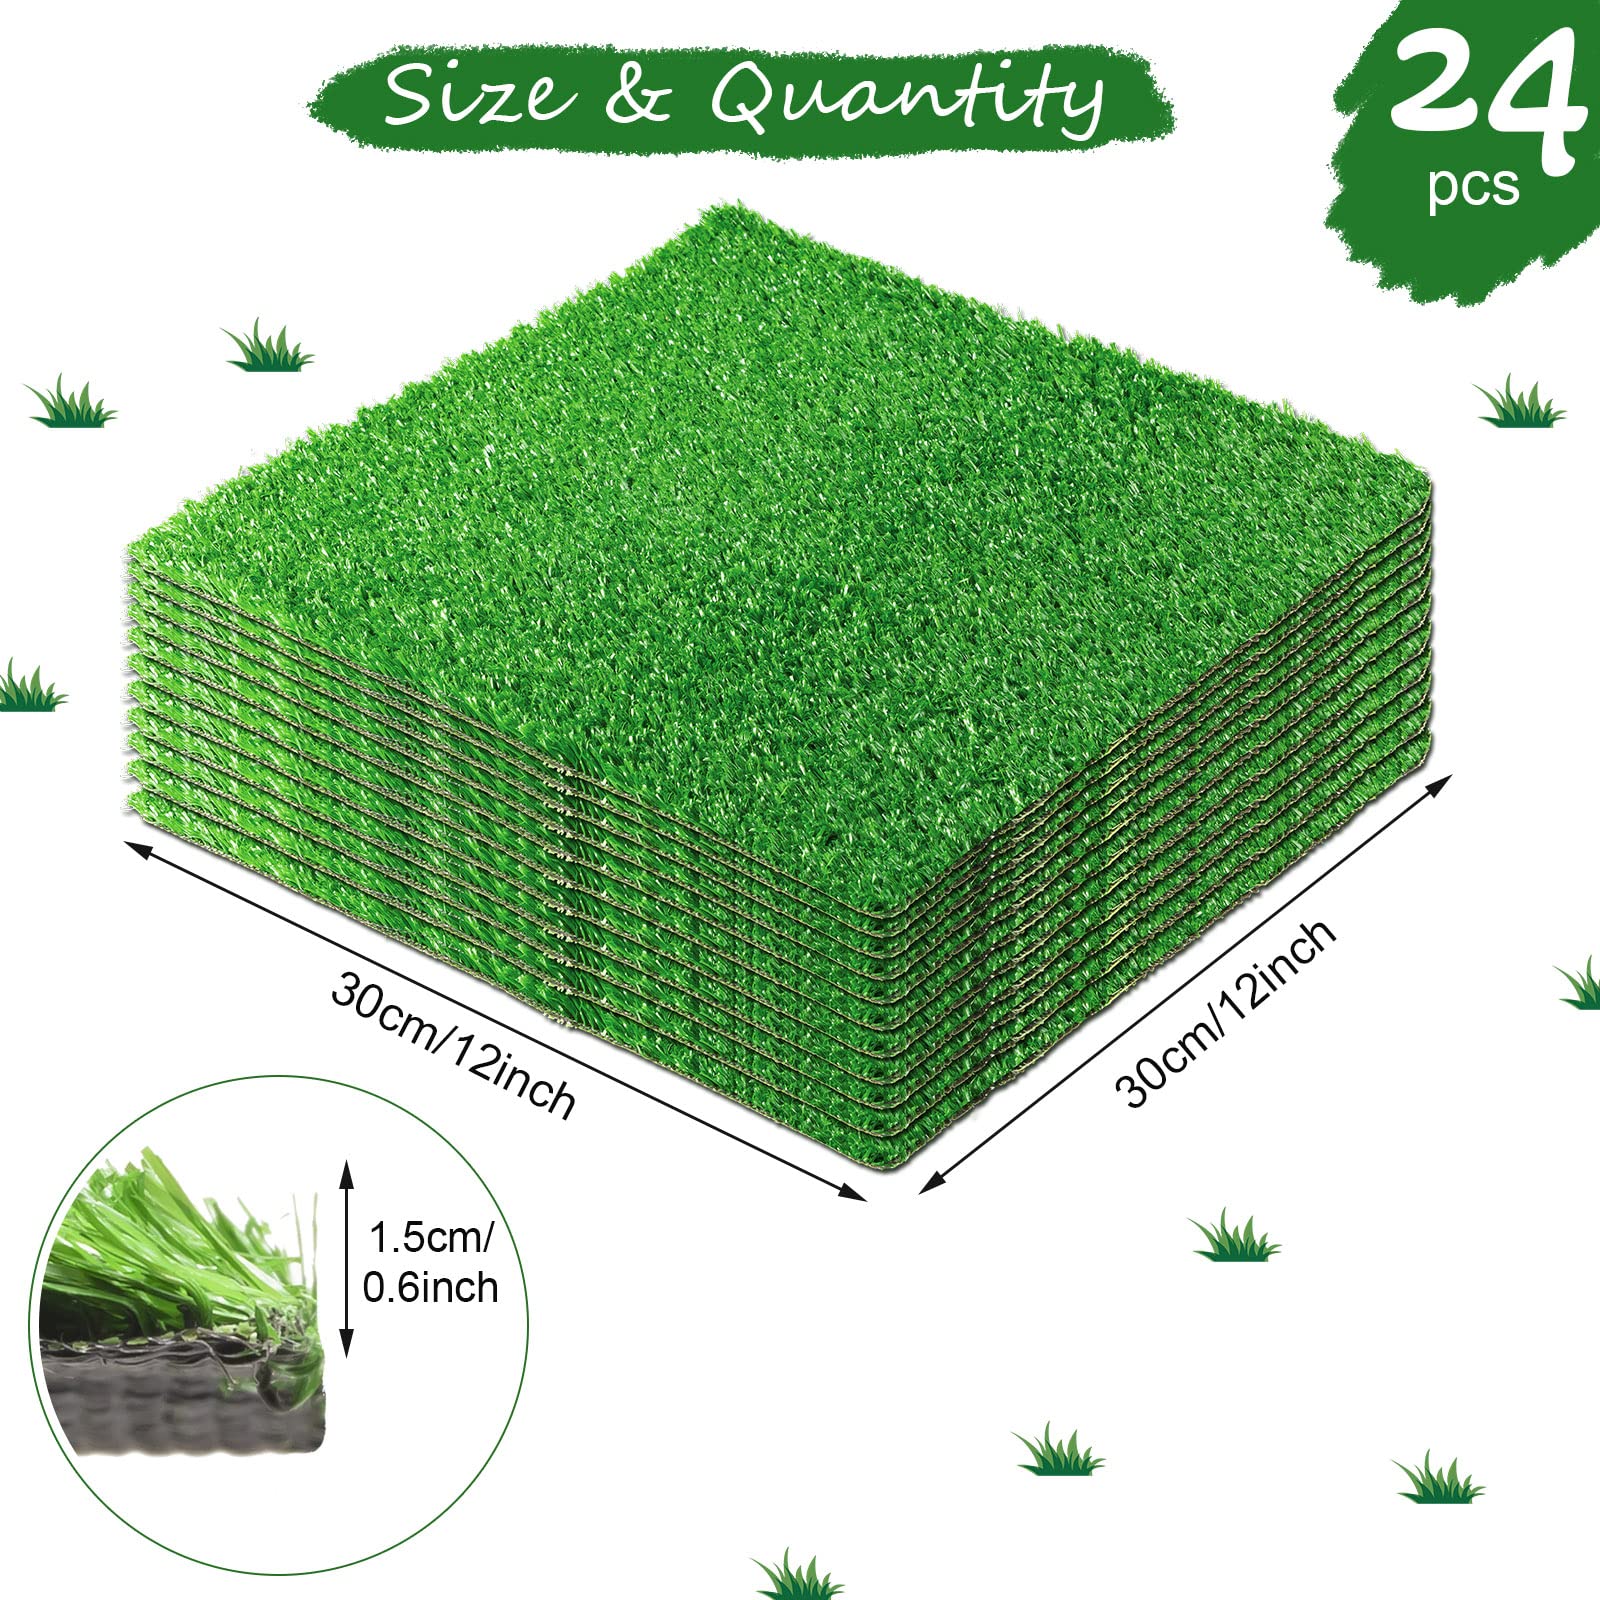 24 Pieces Synthetic Artificial Grass Turf Grass Square Shaped Mat 12 x 12 Inch Garden Grass Tiles Fake Grass Patches DIY Grass Decoration Miniature Grass for Craft Dogs Indoor Outdoor Lawn Decoration